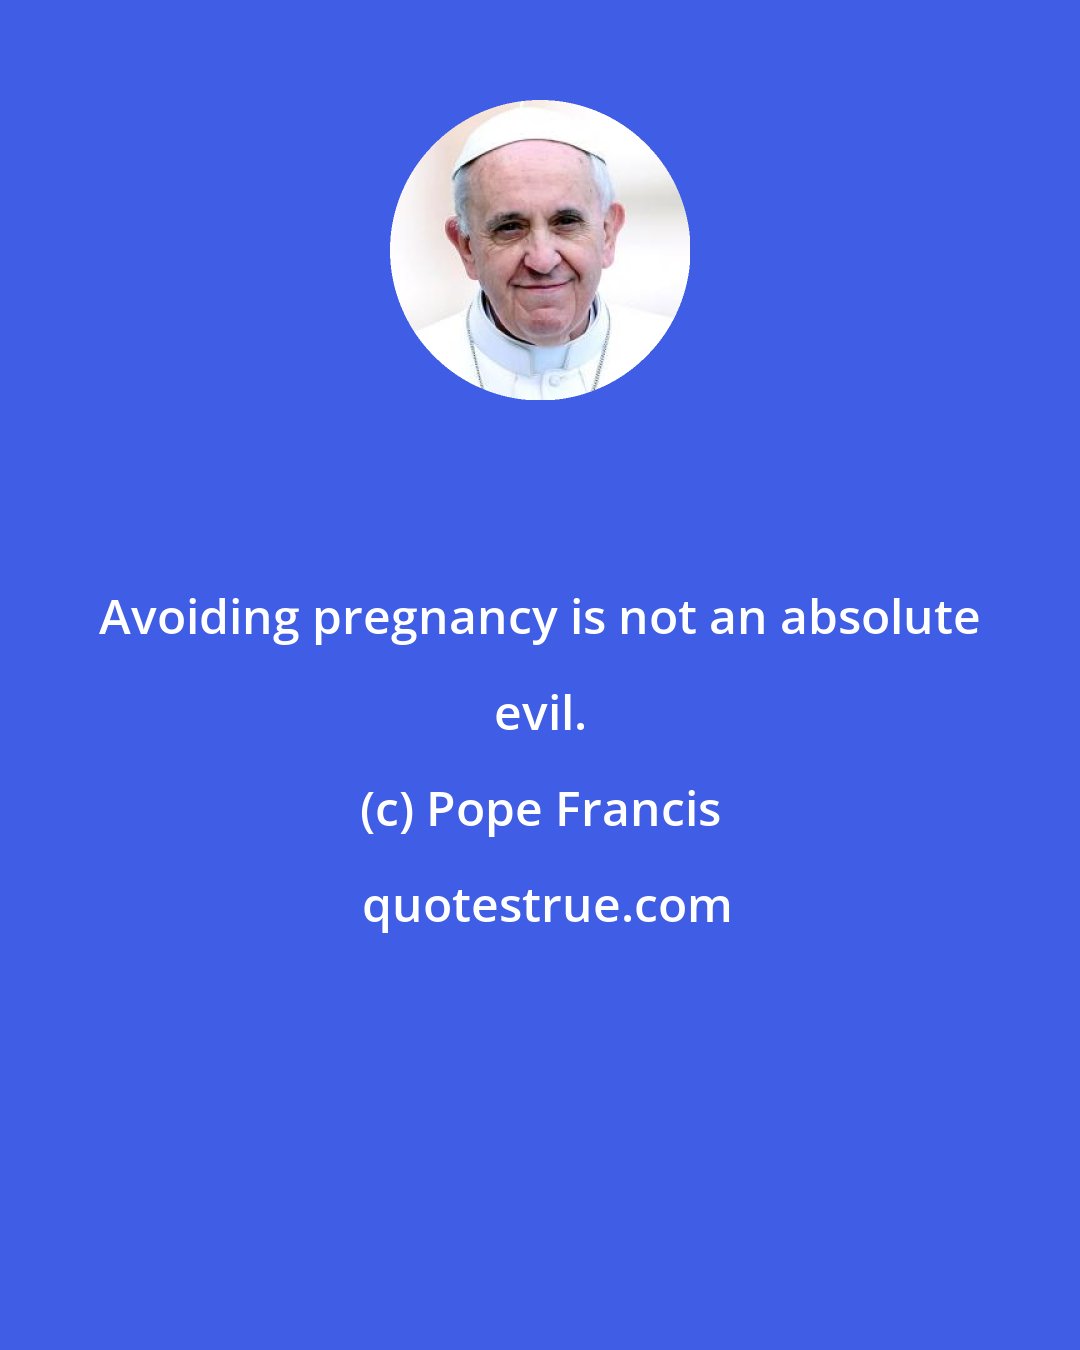 Pope Francis: Avoiding pregnancy is not an absolute evil.